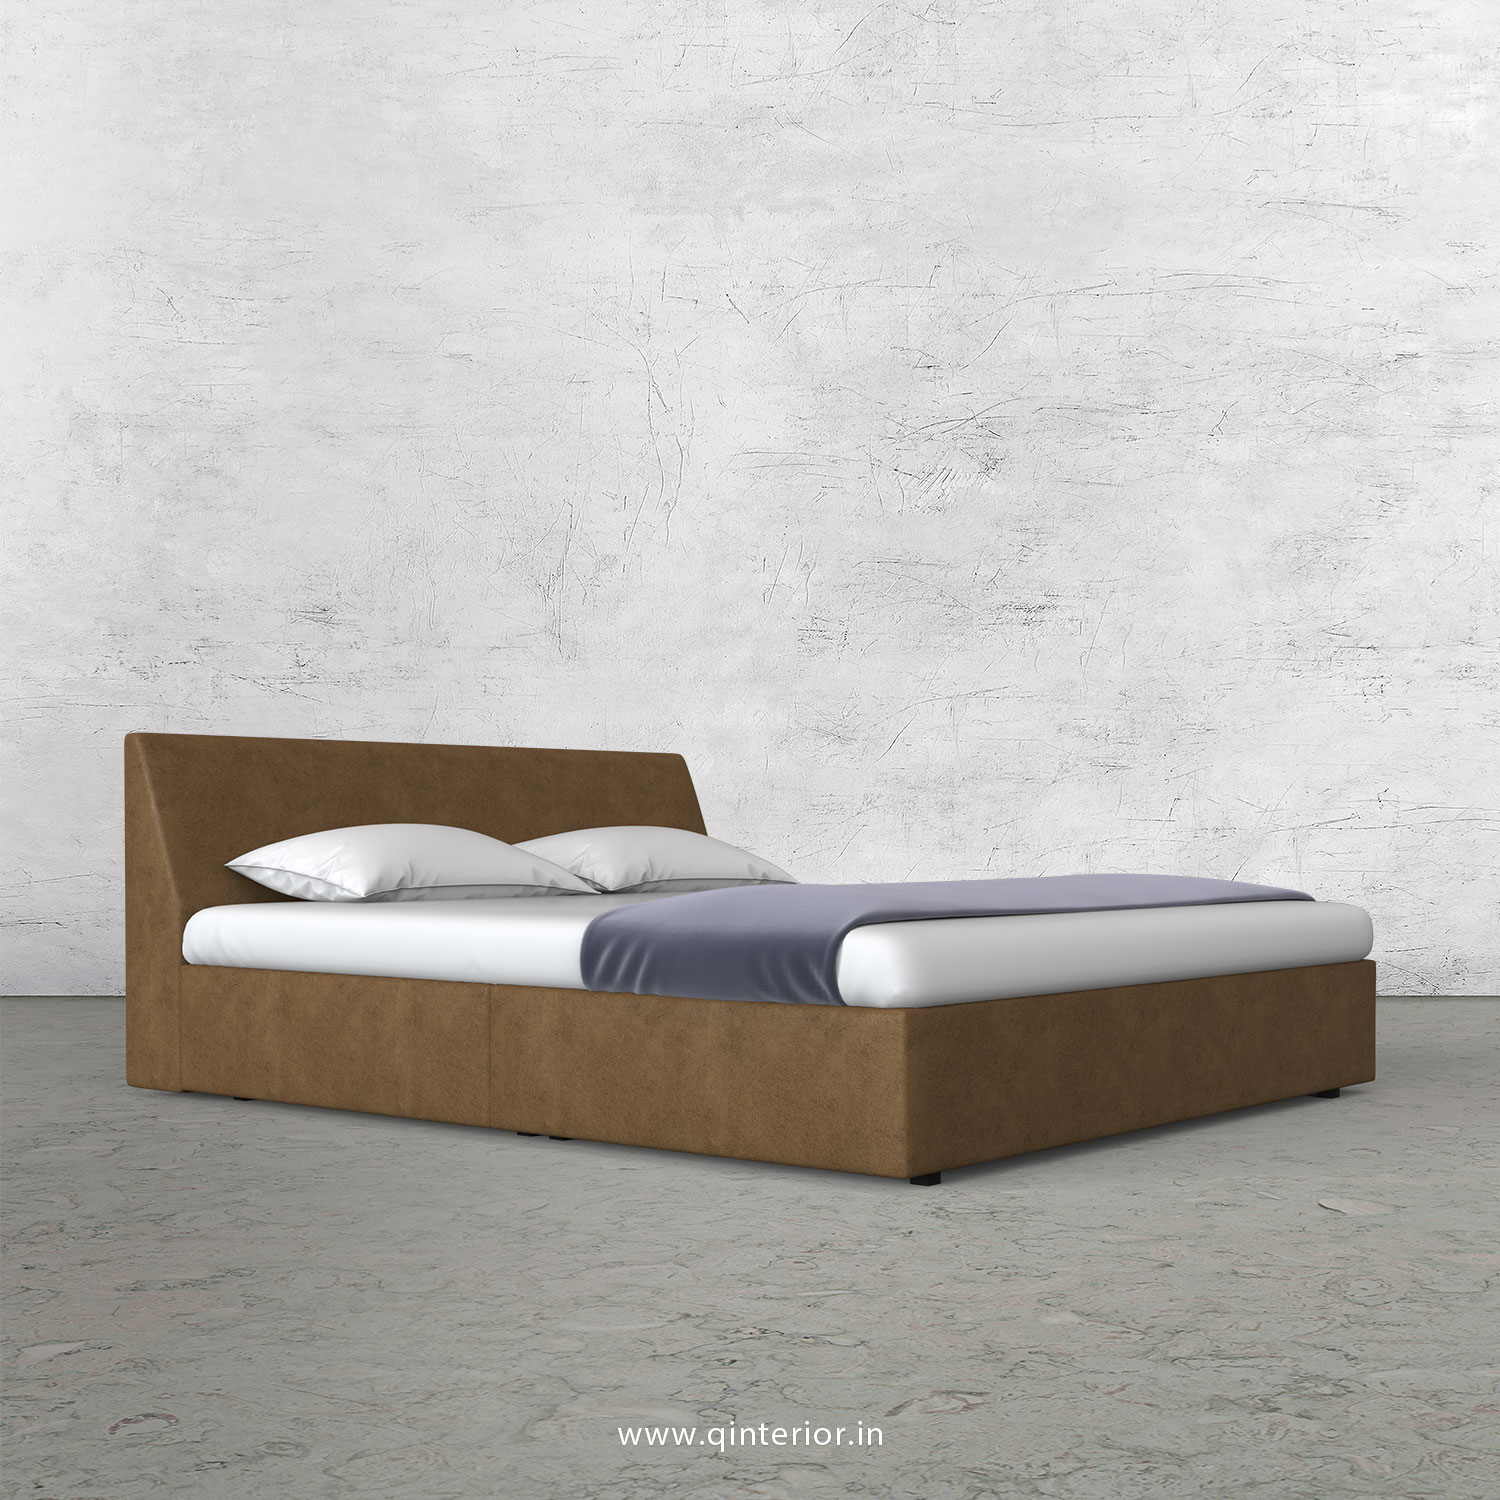 Viva King Sized Bed in Fab Leather Fabric - KBD009 FL02